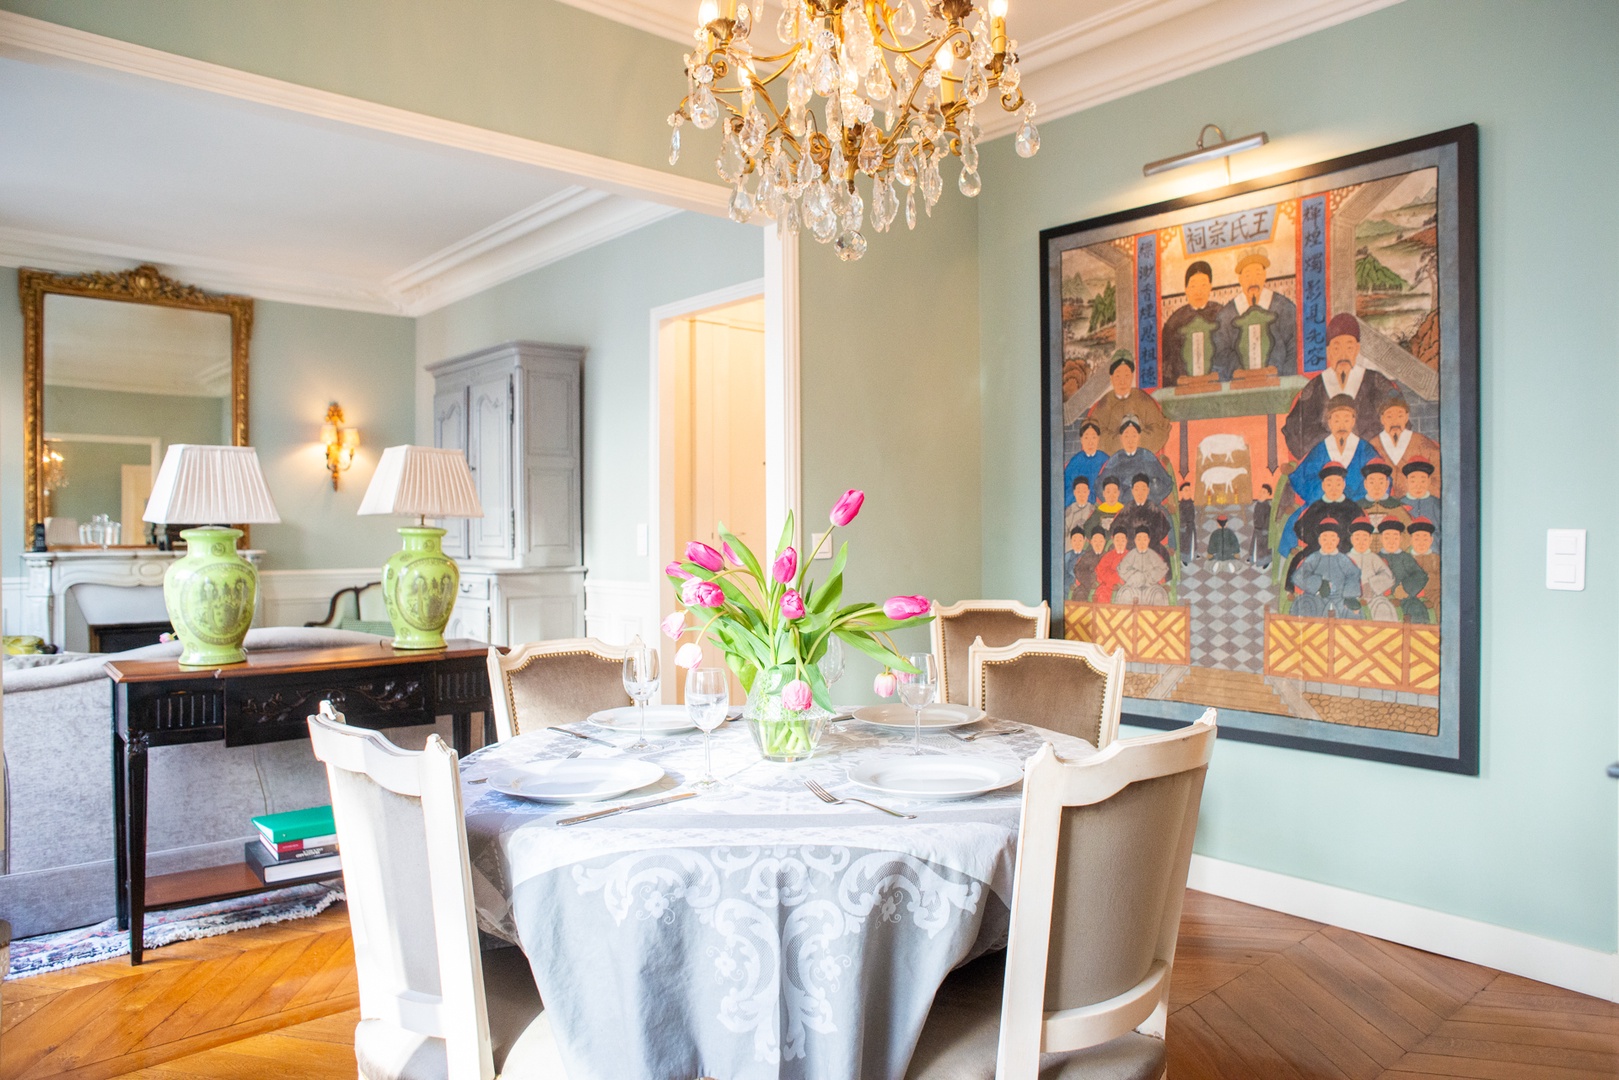 Entertain Paris-style in this beautiful dining room!